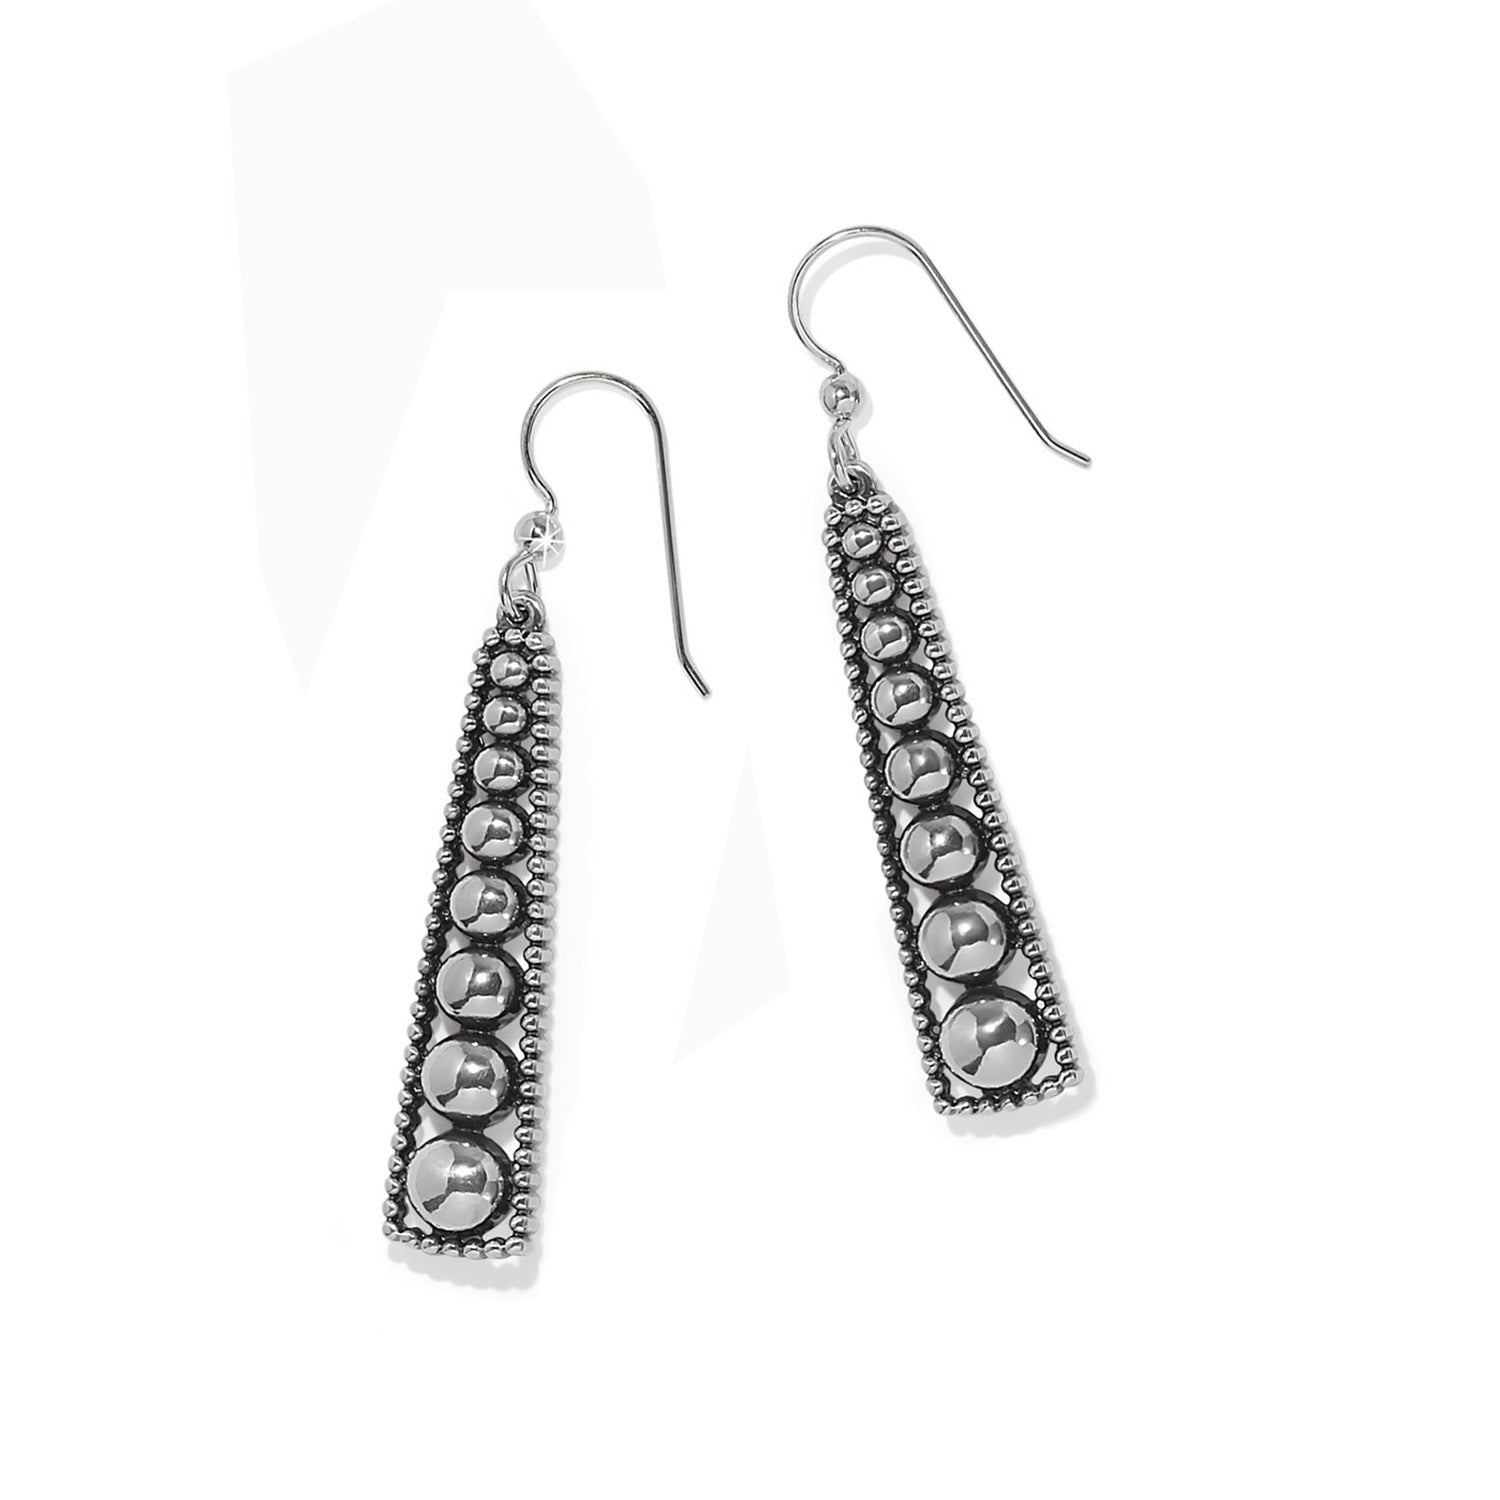 Pretty Tough Pyramid French Wire Earrings